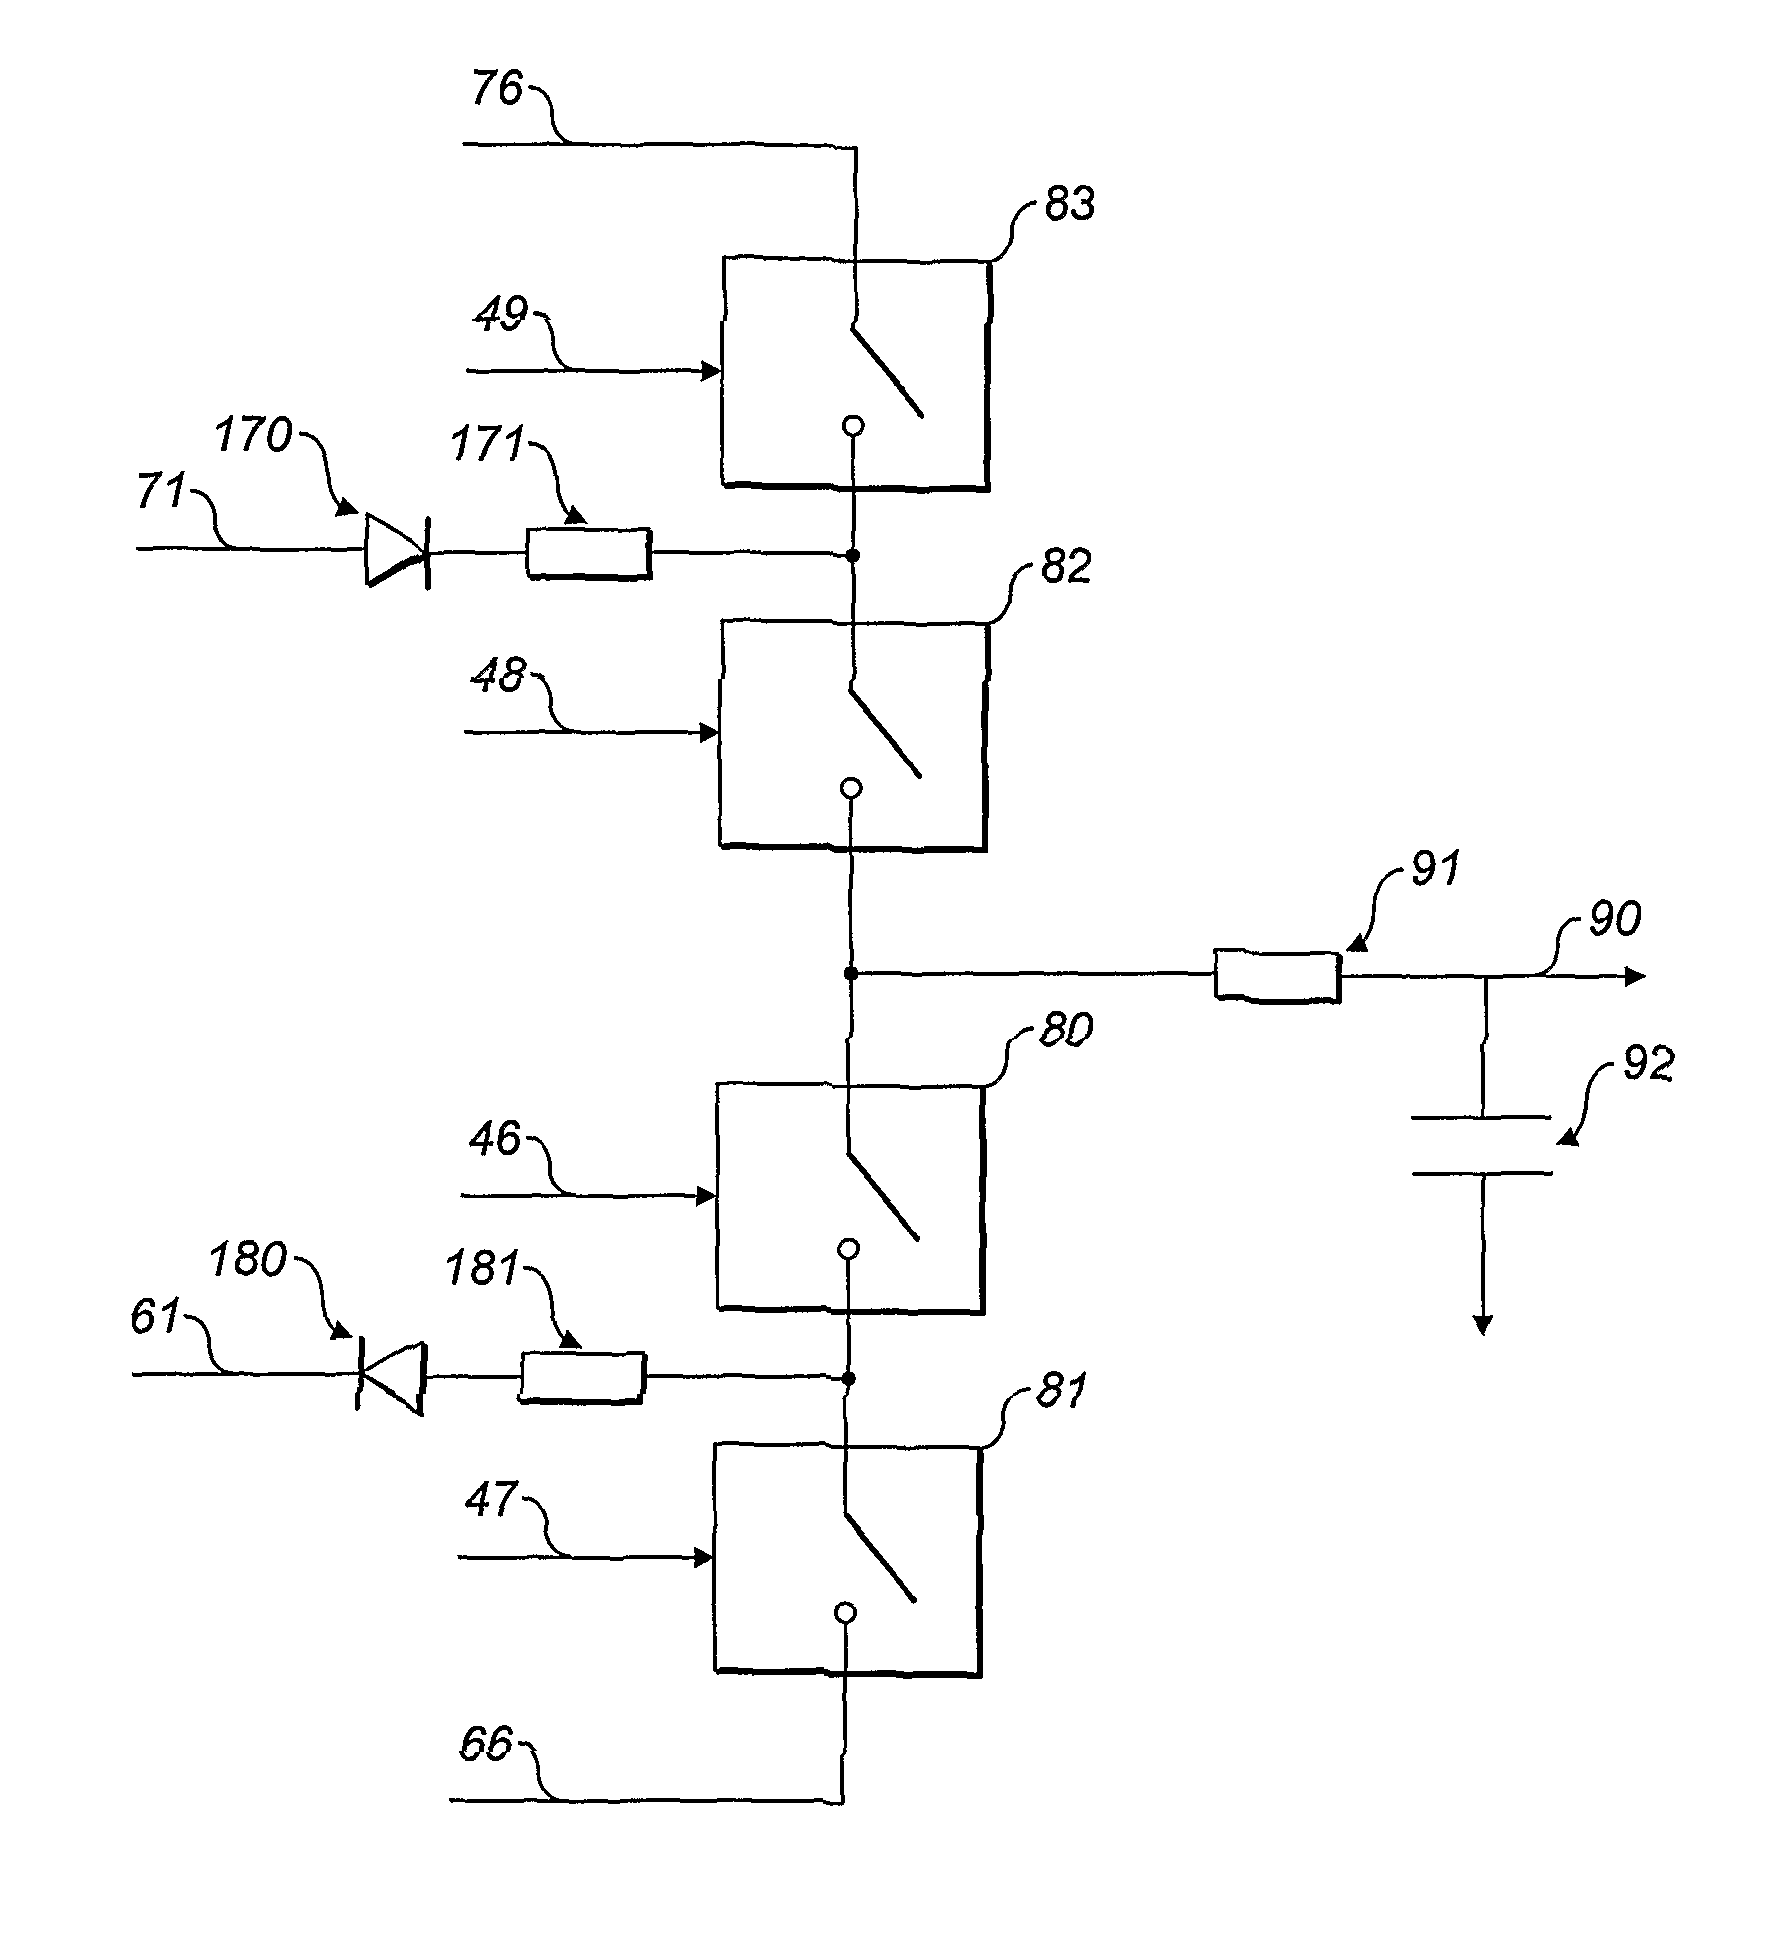 Mass spectrometer power sources with polarity switching